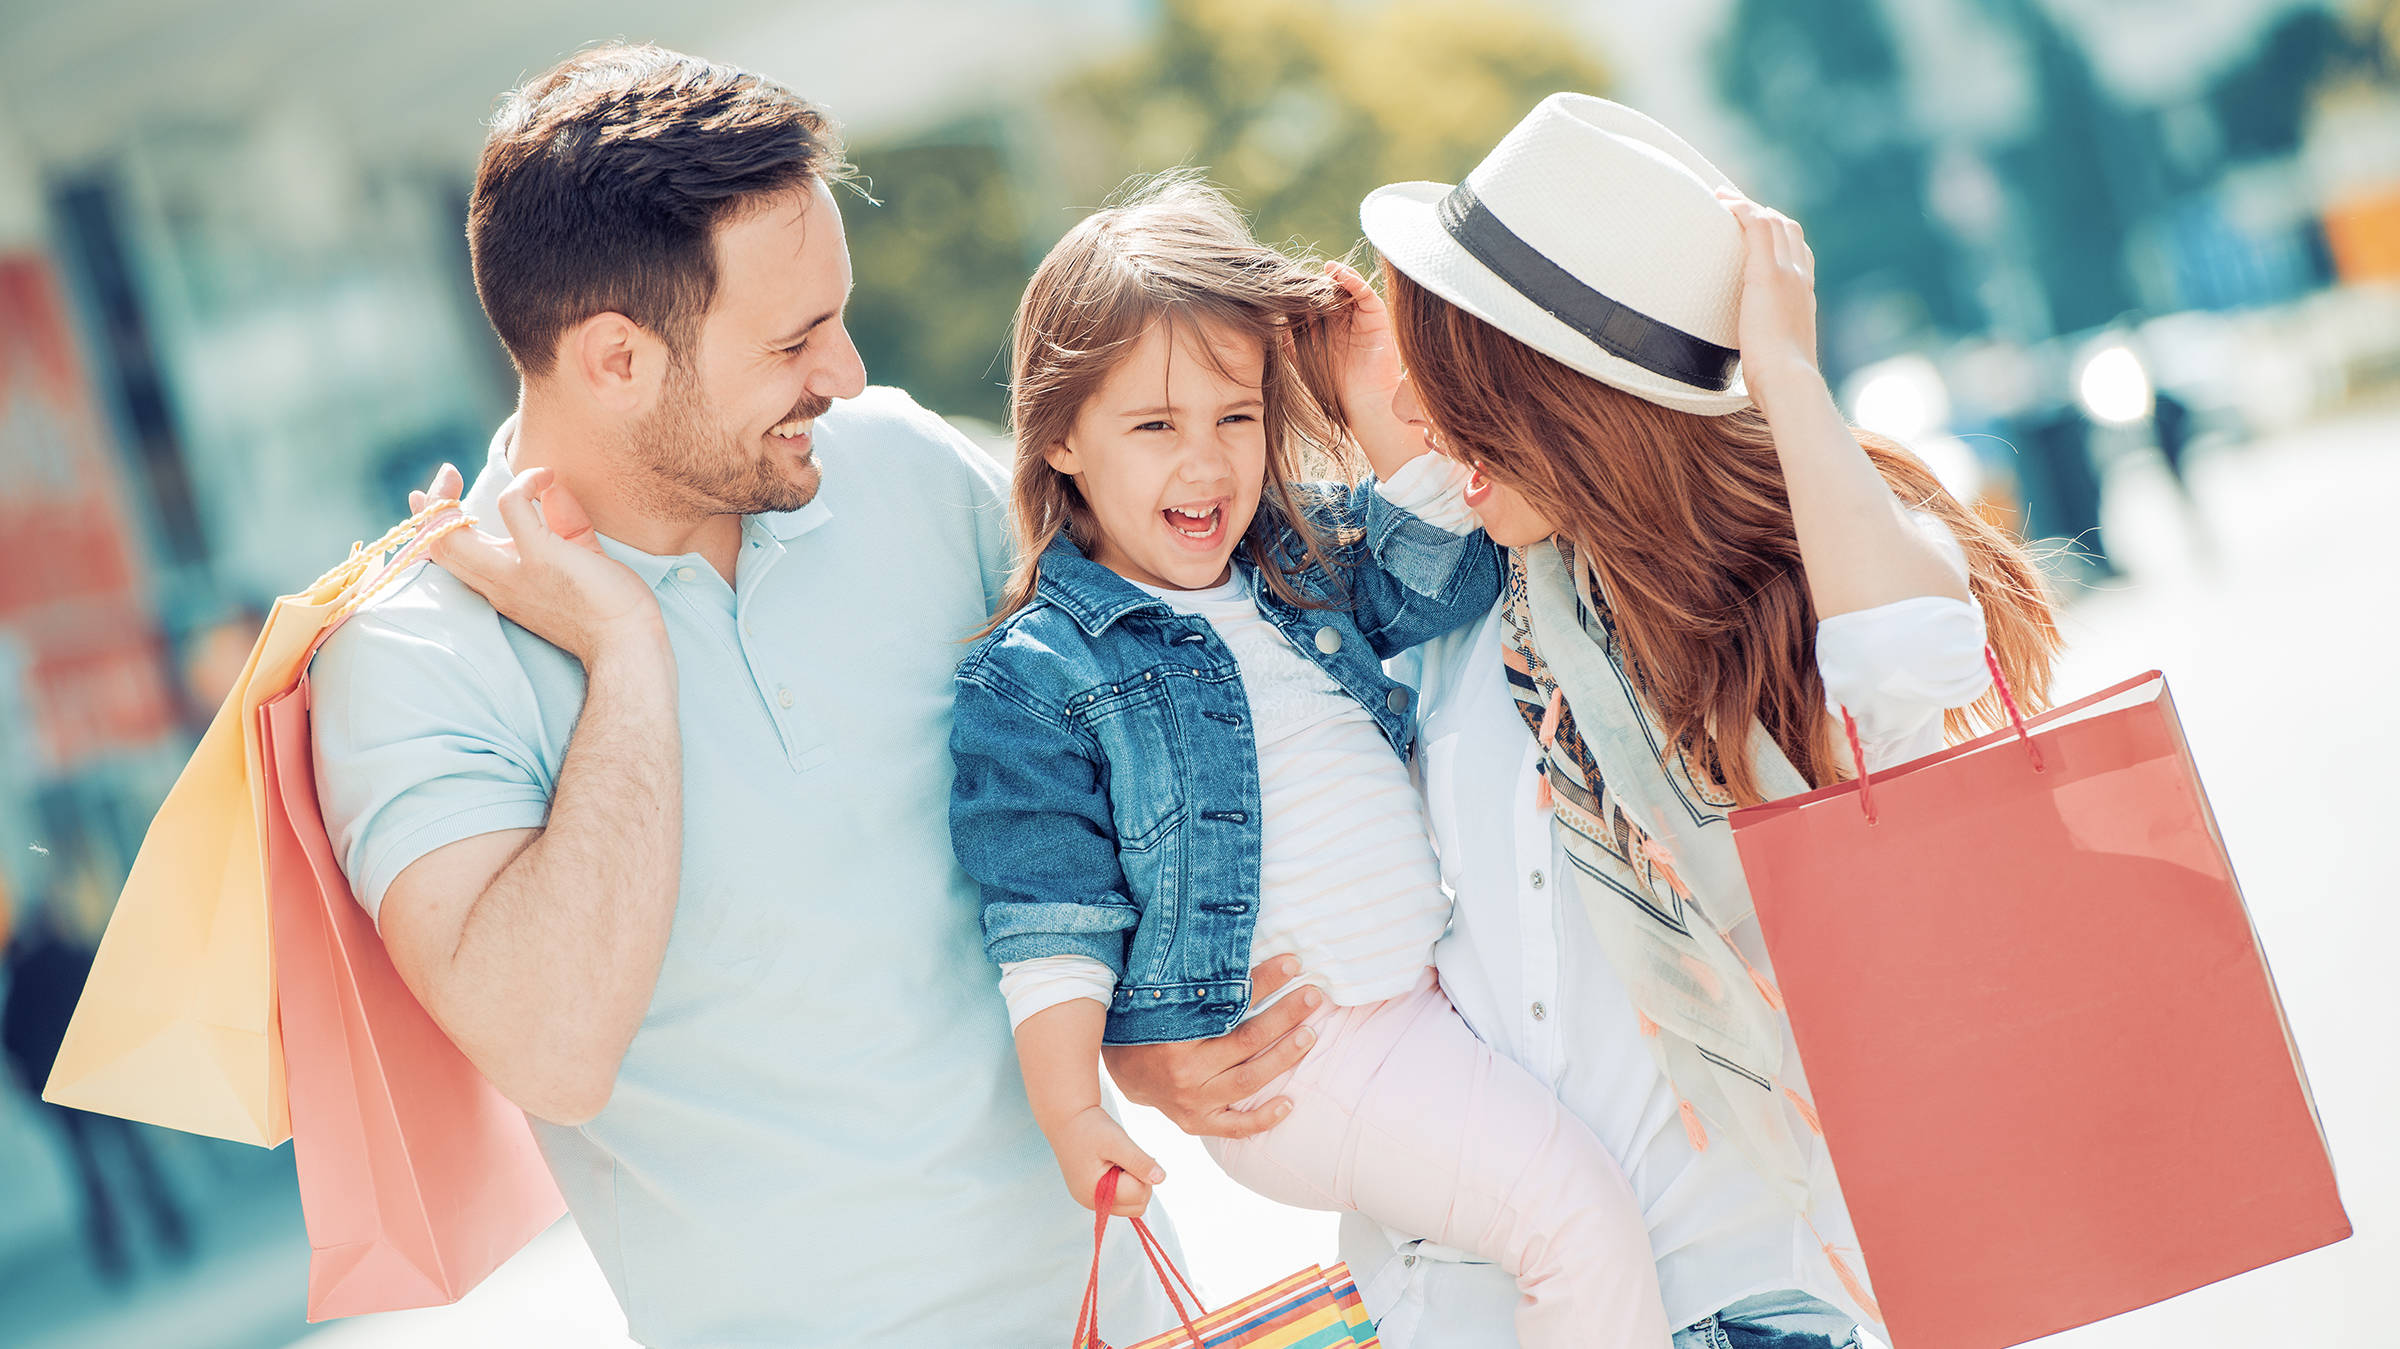 Familienerlebnis Shopping | H-Hotels.com